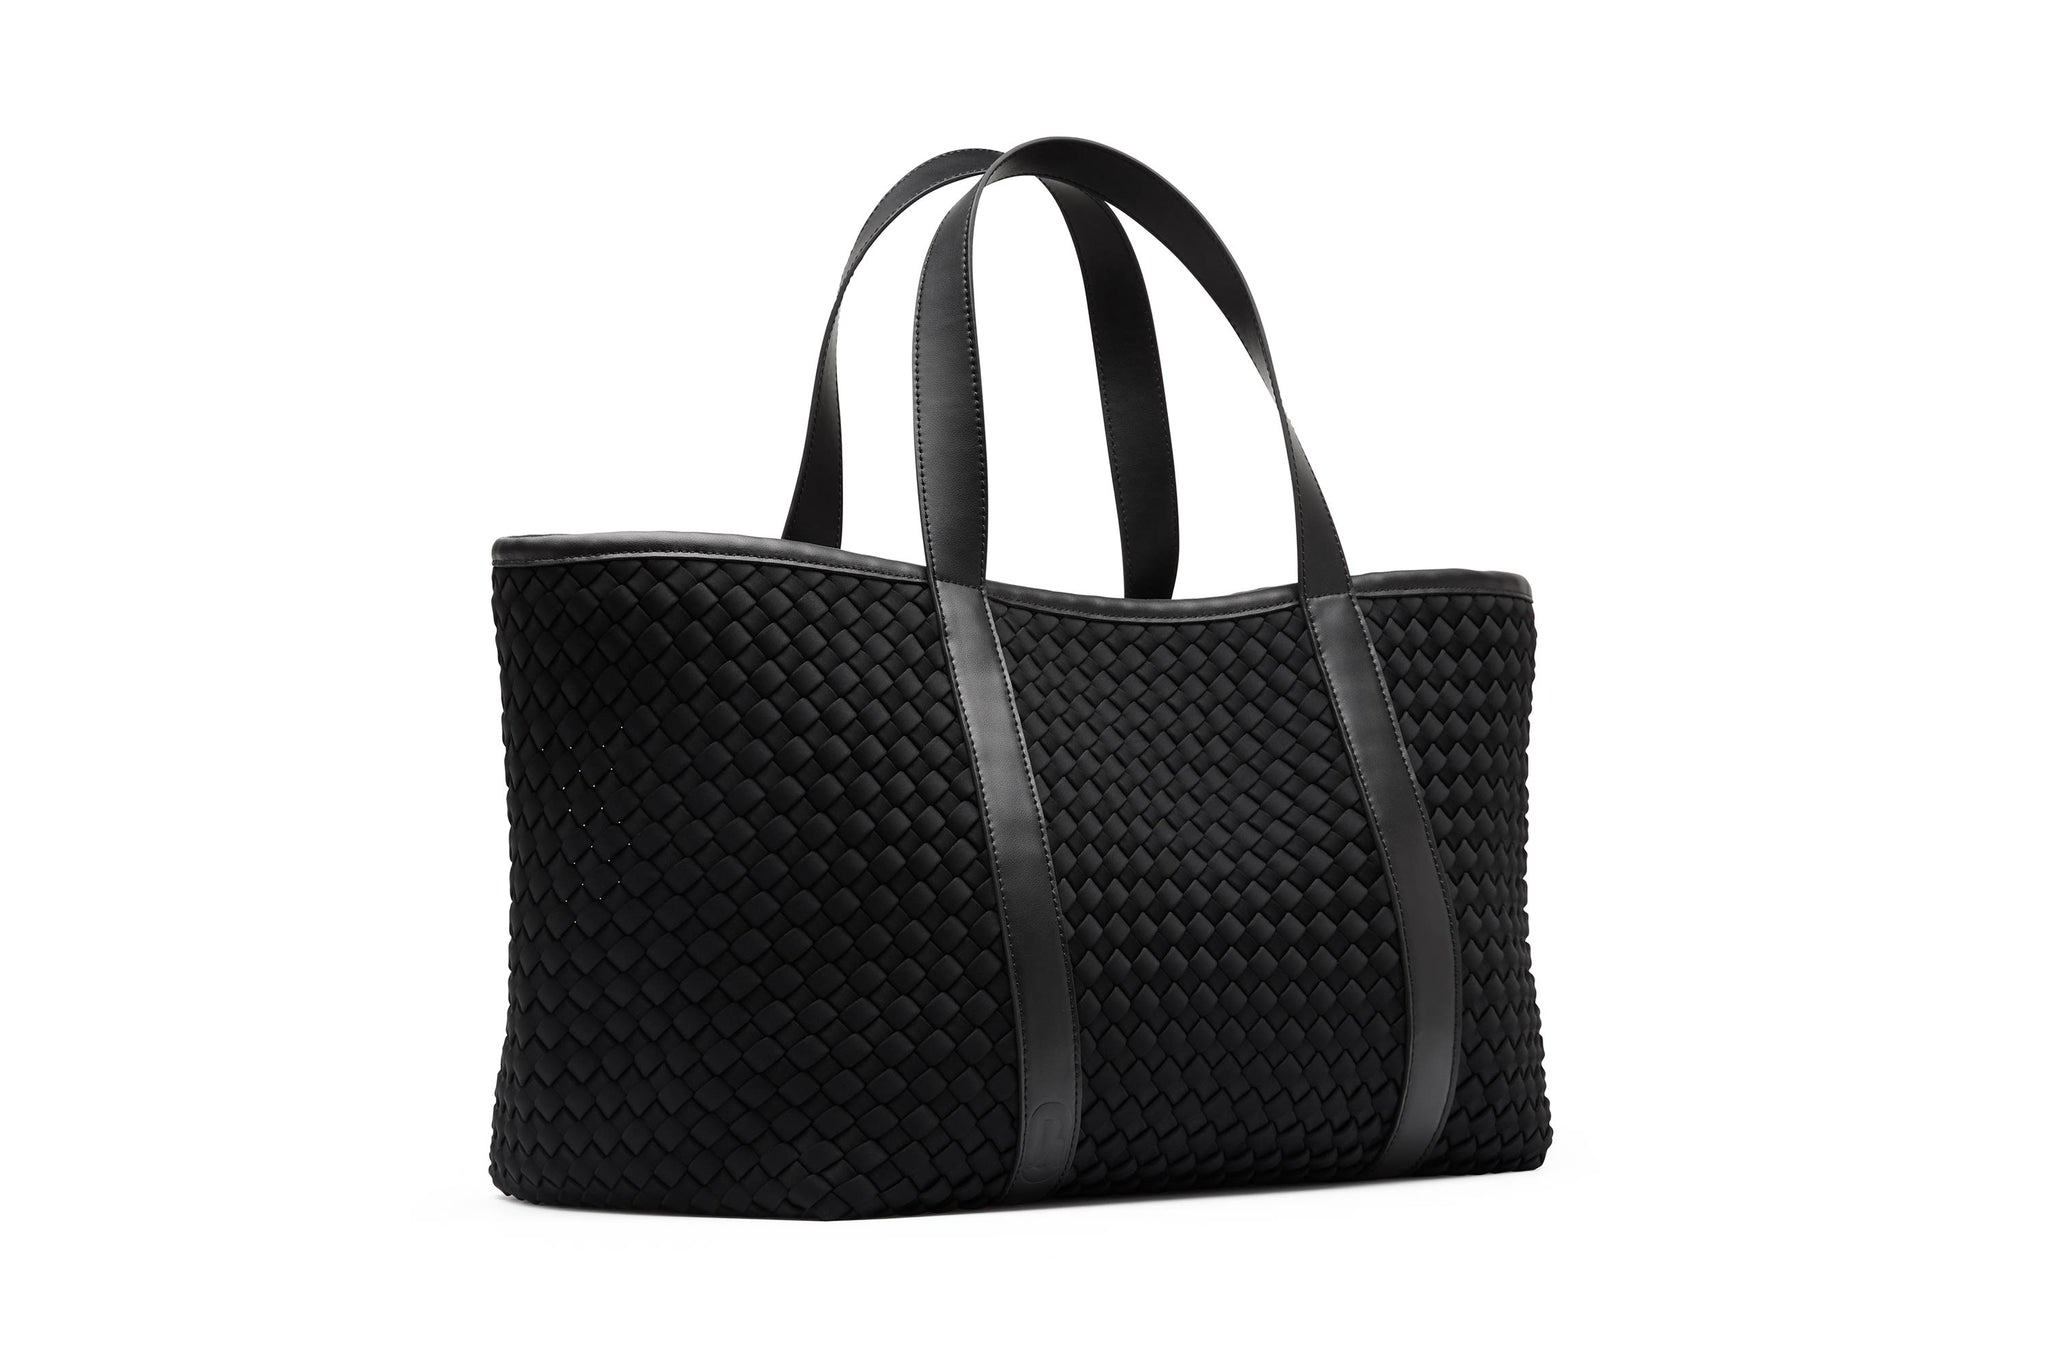 18.56 Rylan Uni-sex Black Woven Neoprene with Leather Carry-All Tote | EOFY Sale